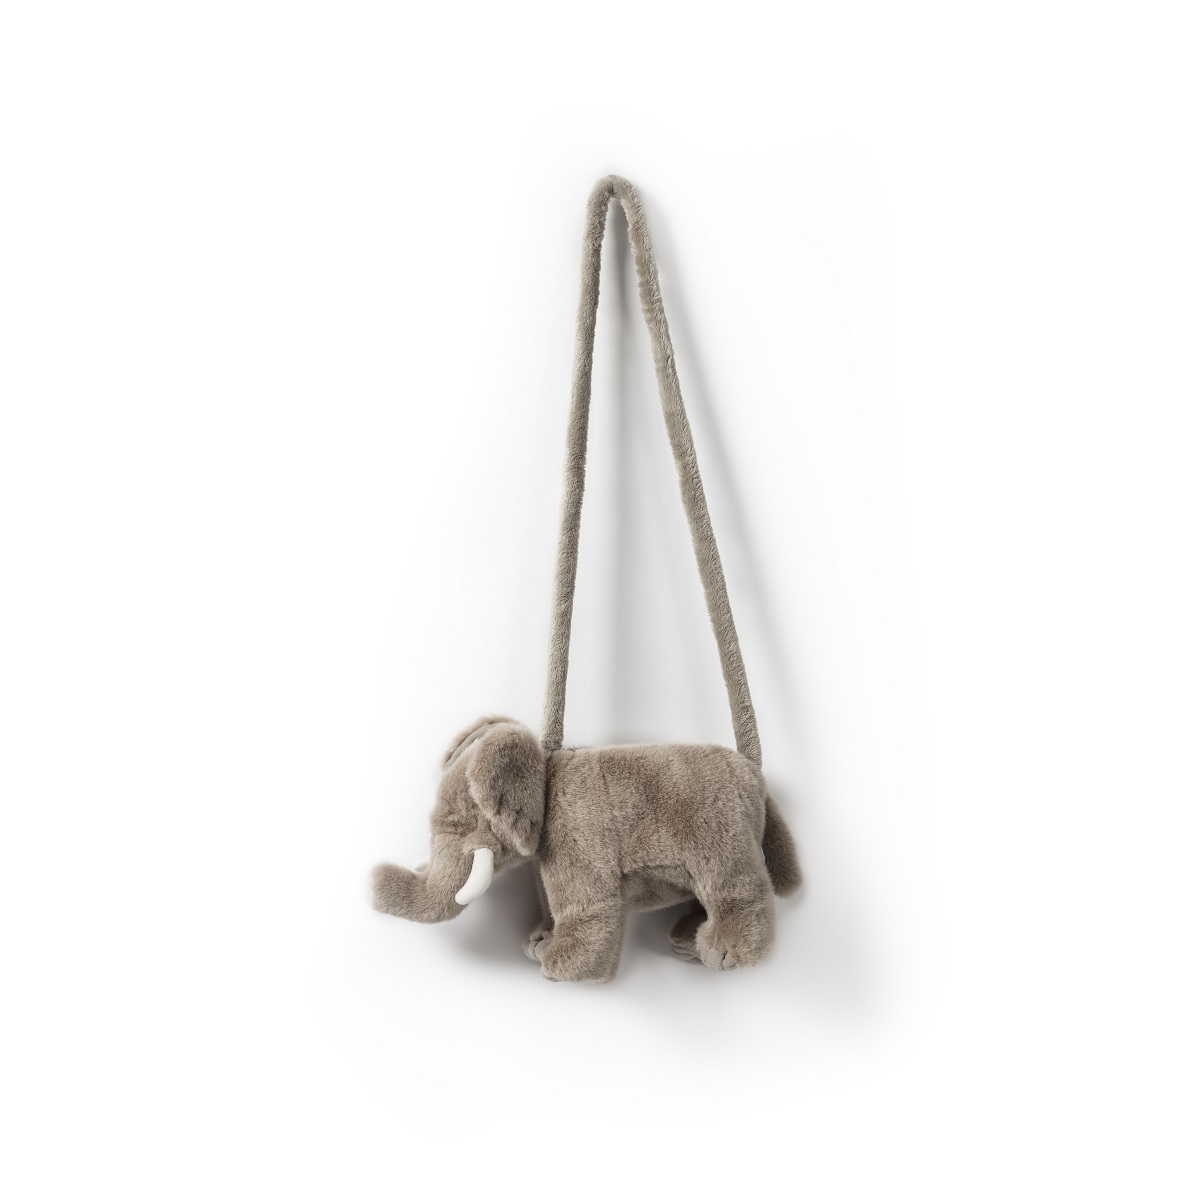 Purse, Elephant PRE-ORDER FOR LATE JUNE